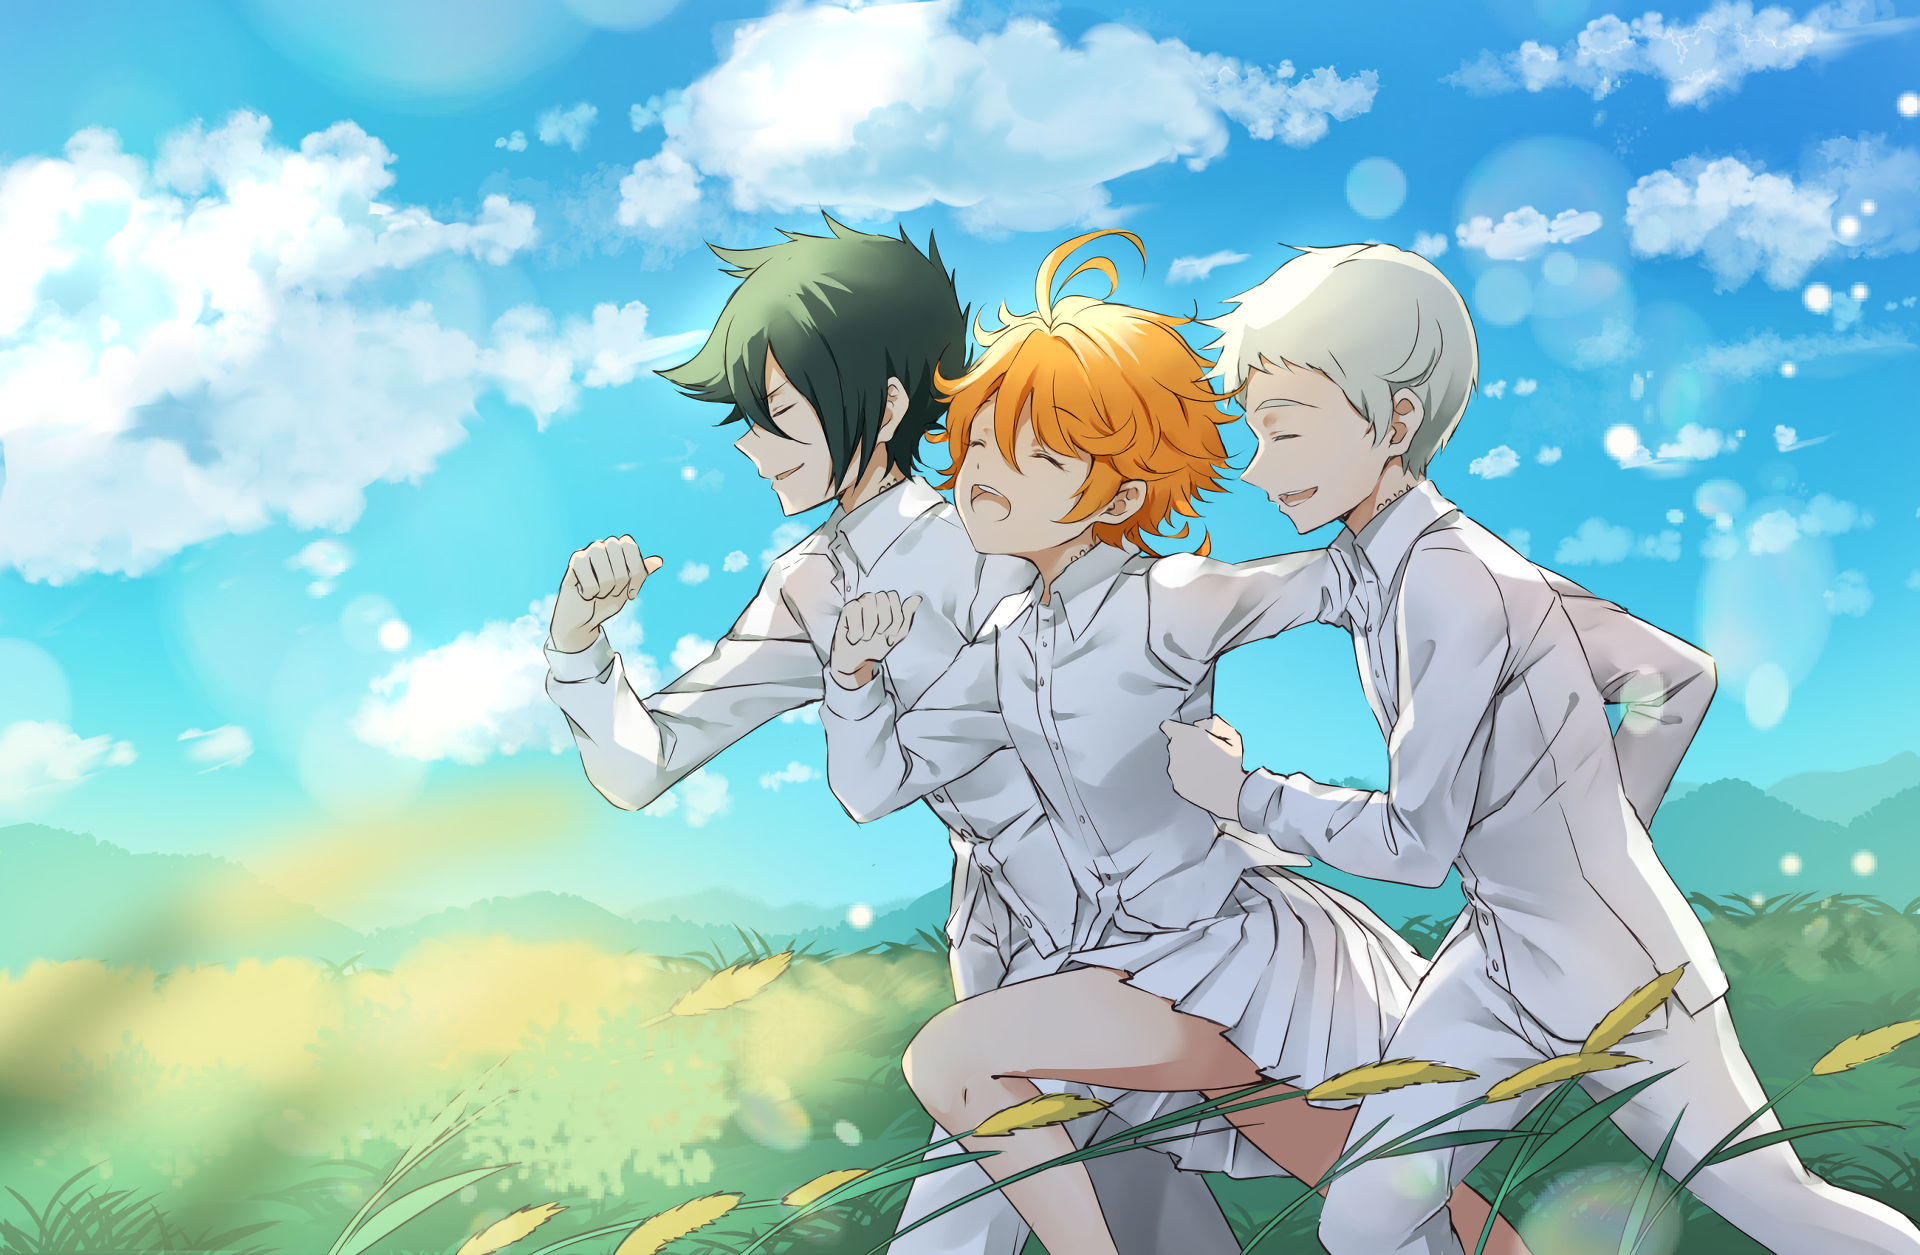 Emma The Promised Neverland Norman The Promised Neverland Ray The Promised Neverland The Promised Ne 1920x1255